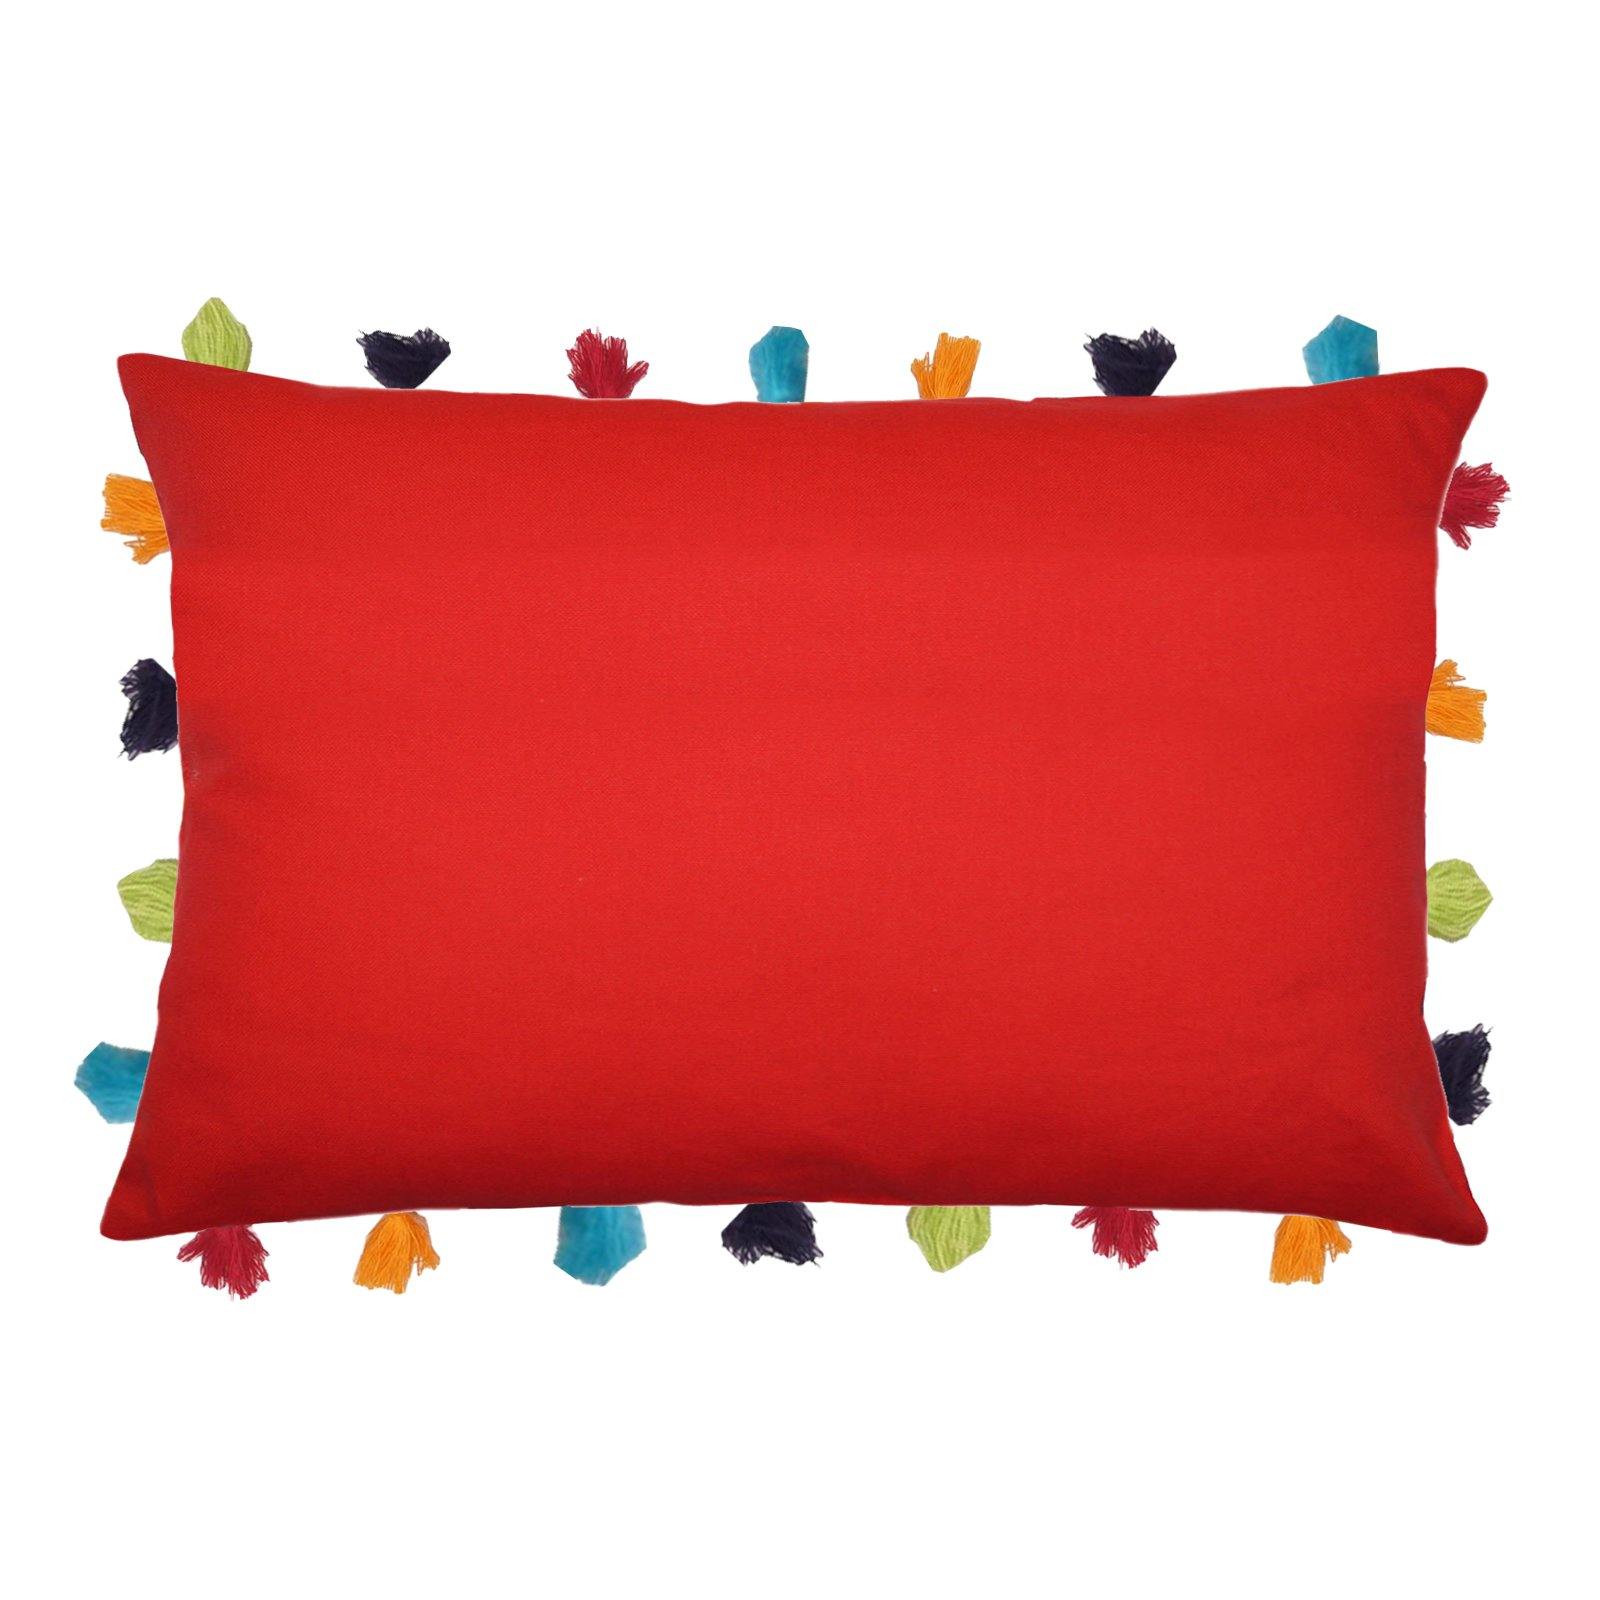 Lushomes Tomato Cushion Cover with Colorful tassels (Single pc, 14 x 20”) - Lushomes